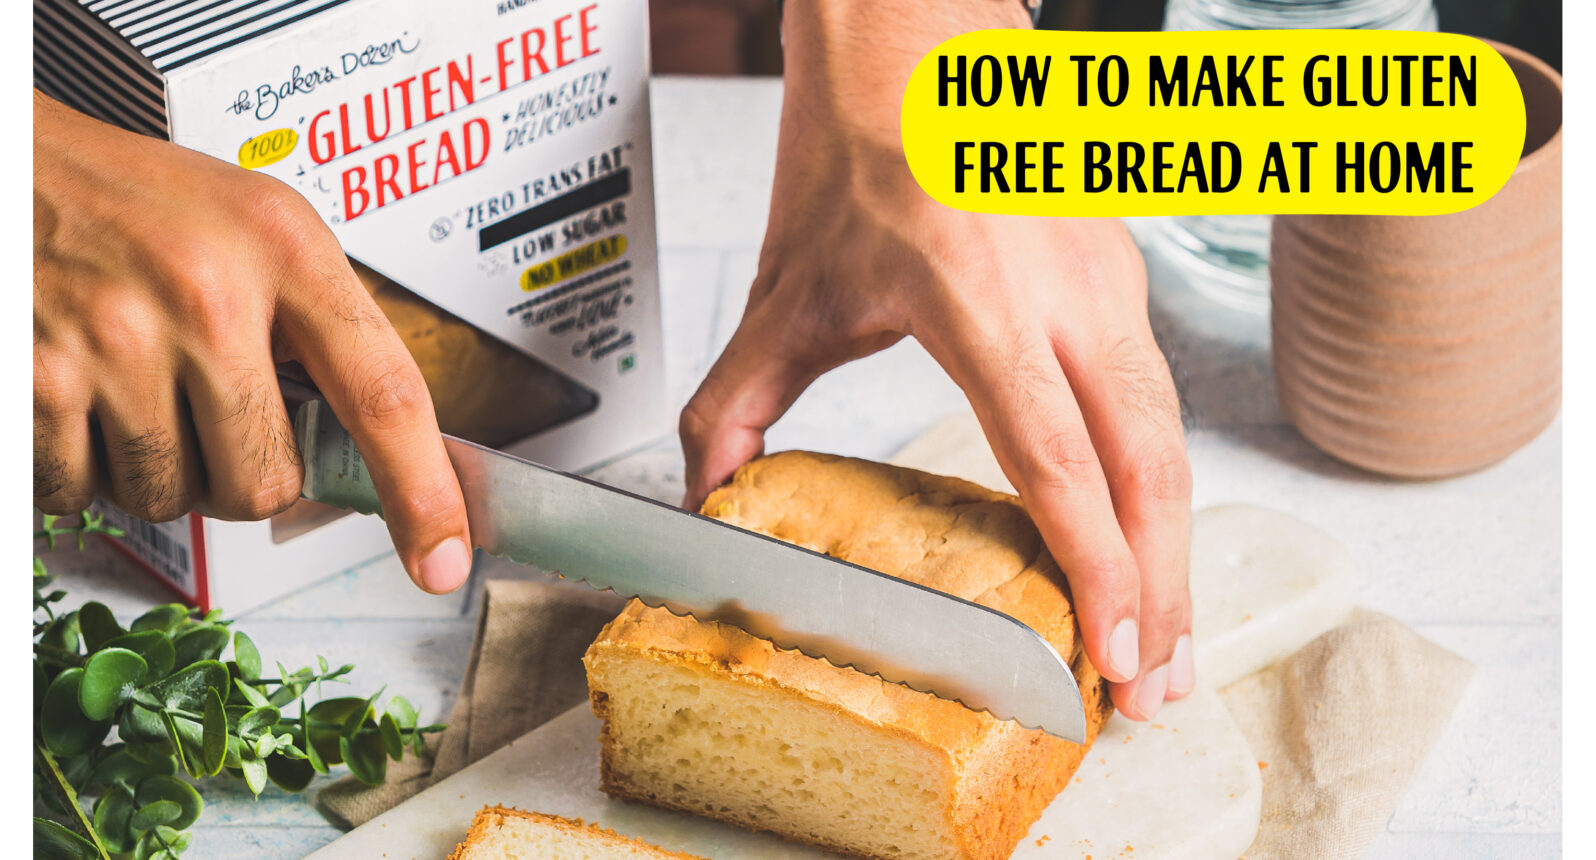 How to make gluten free bread at home